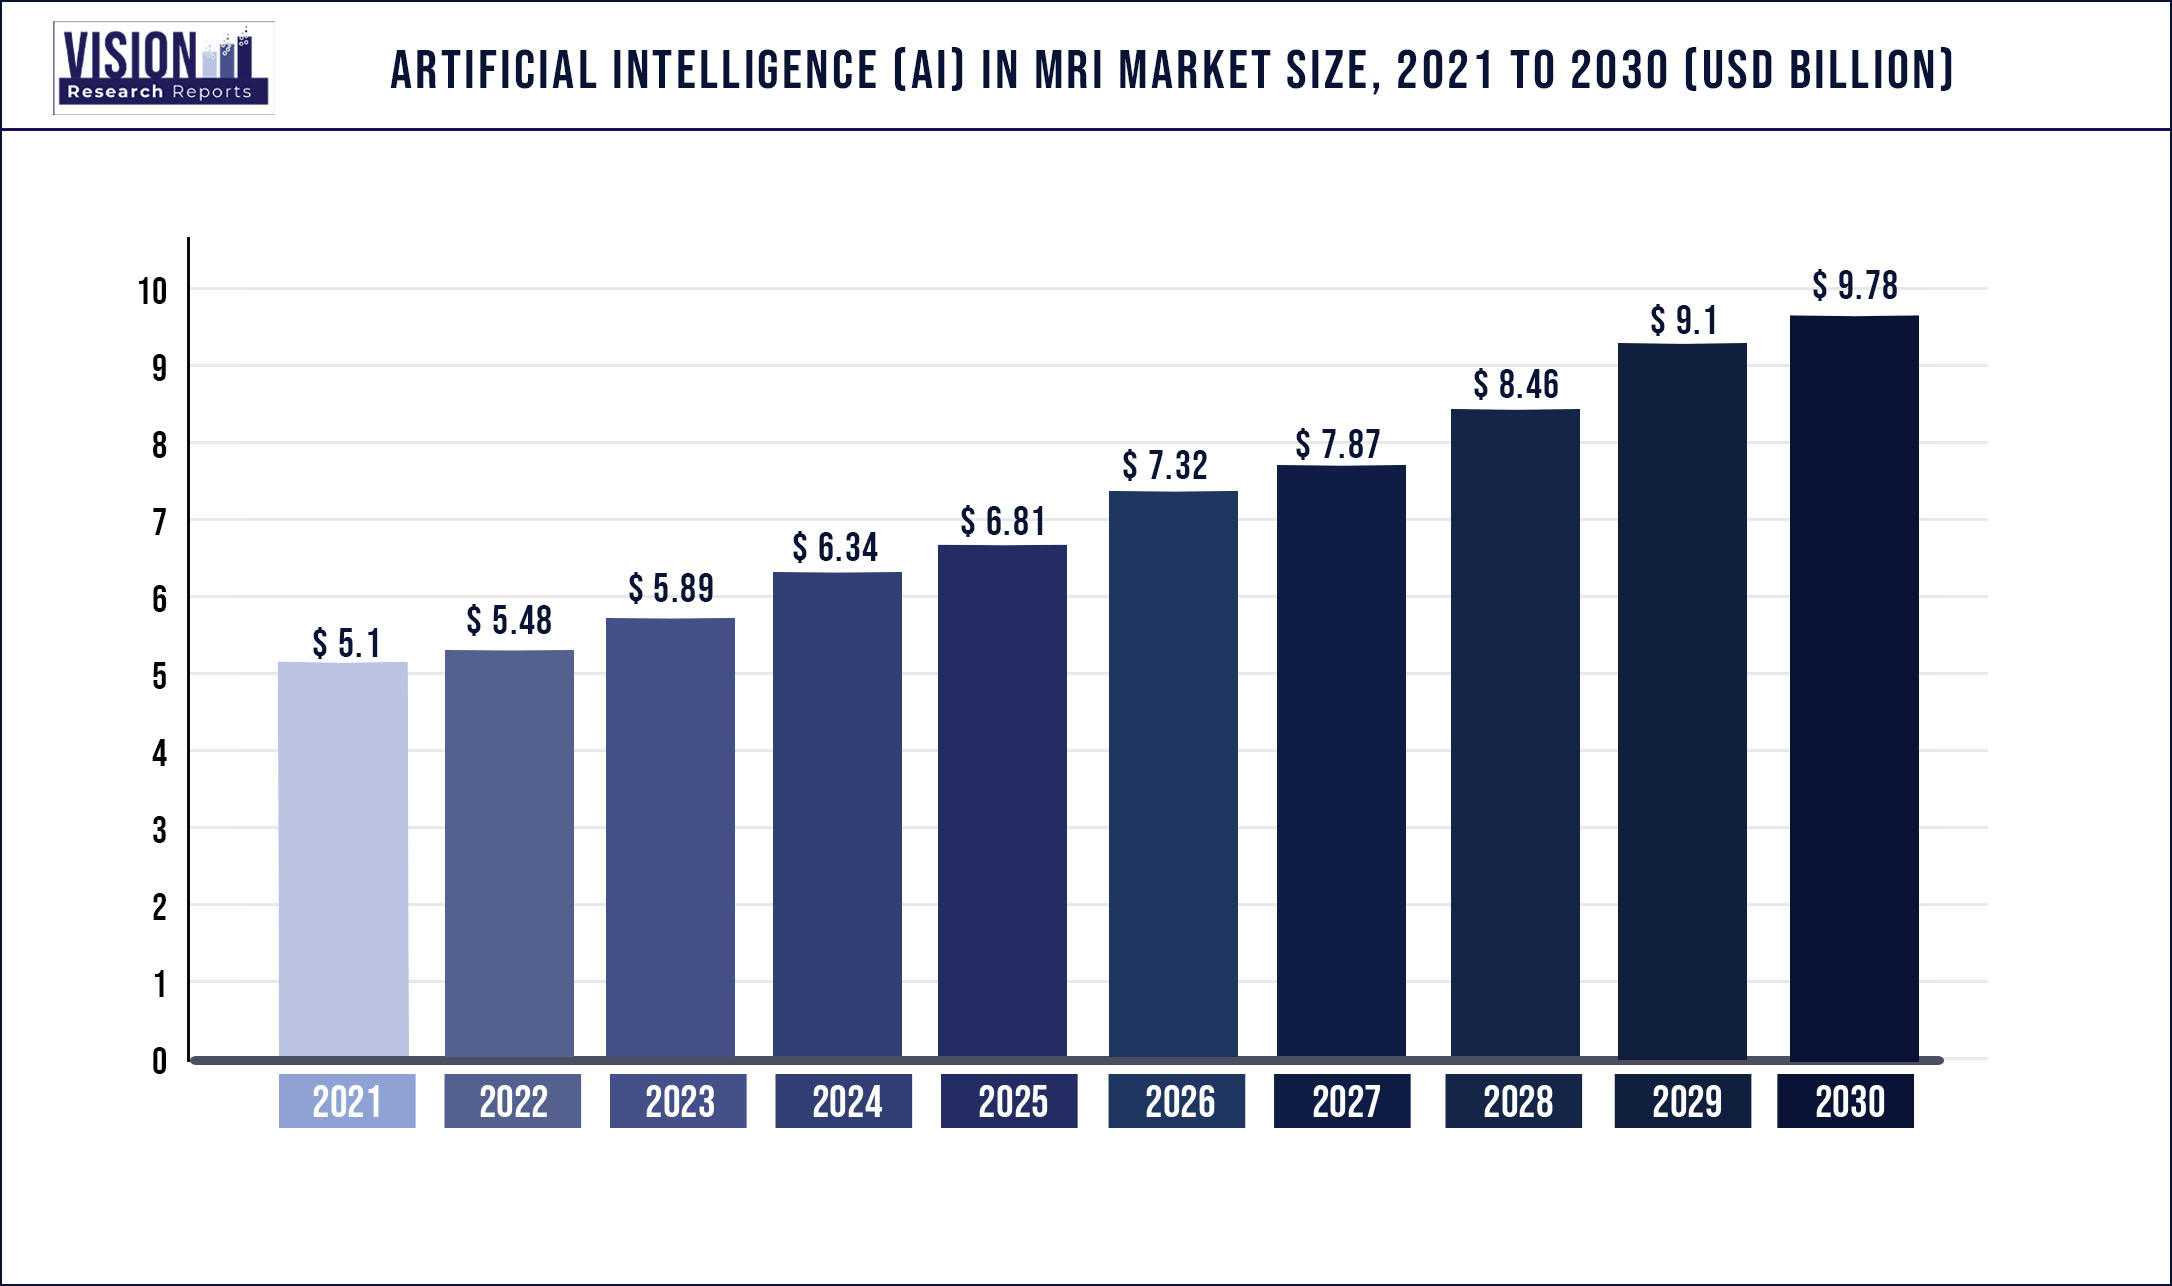 Artificial Intelligence (AI) in MRI Market Size 2021 to 2030